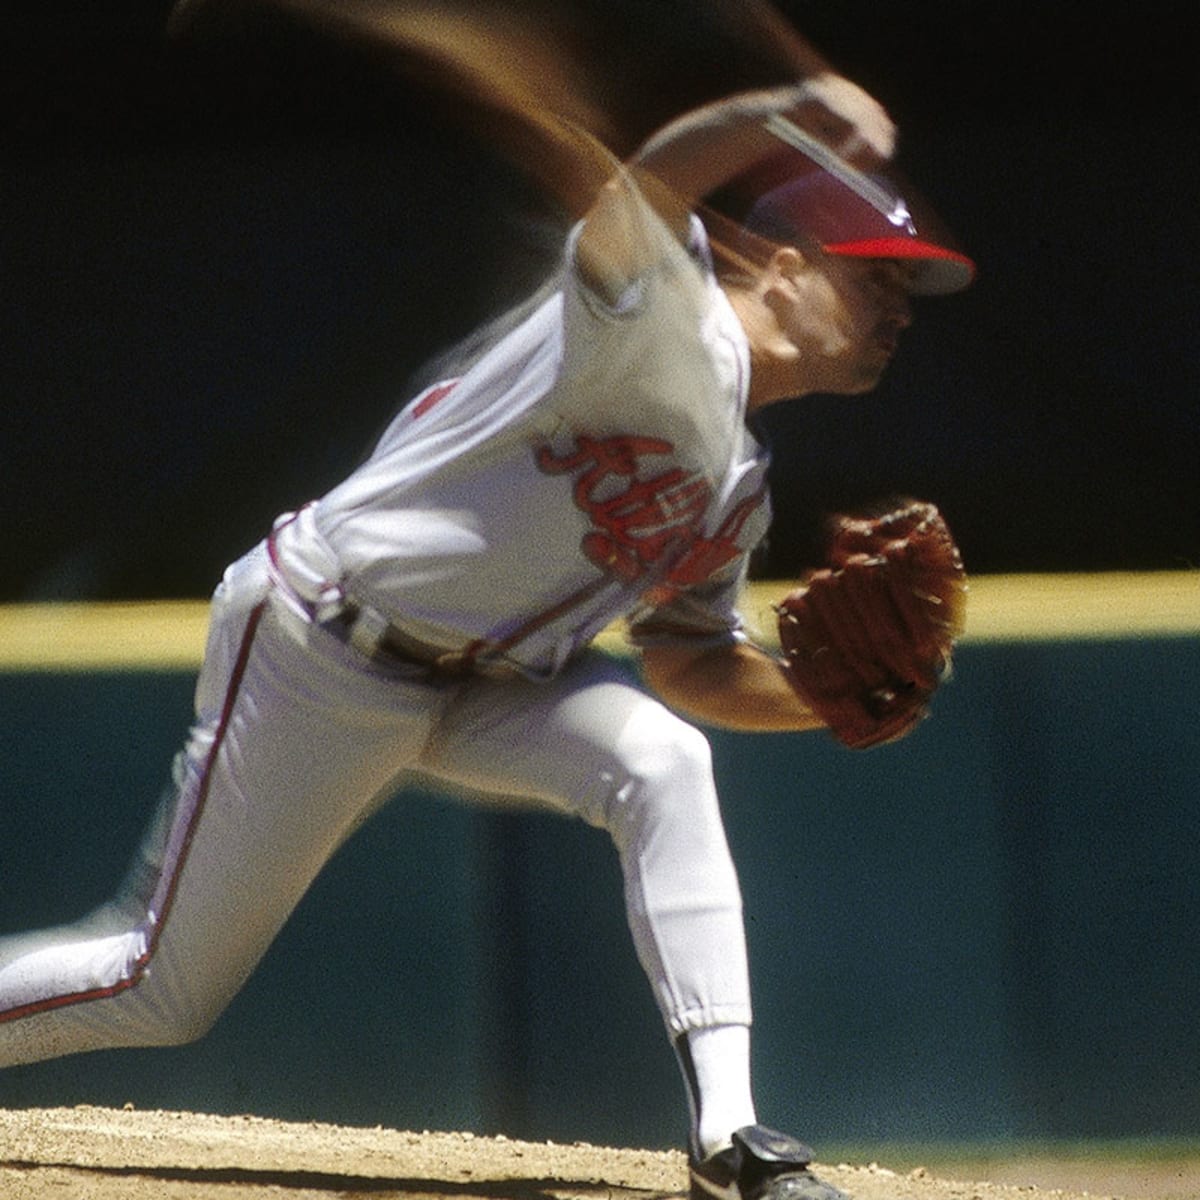 The no-hitter that Greg Maddux never had